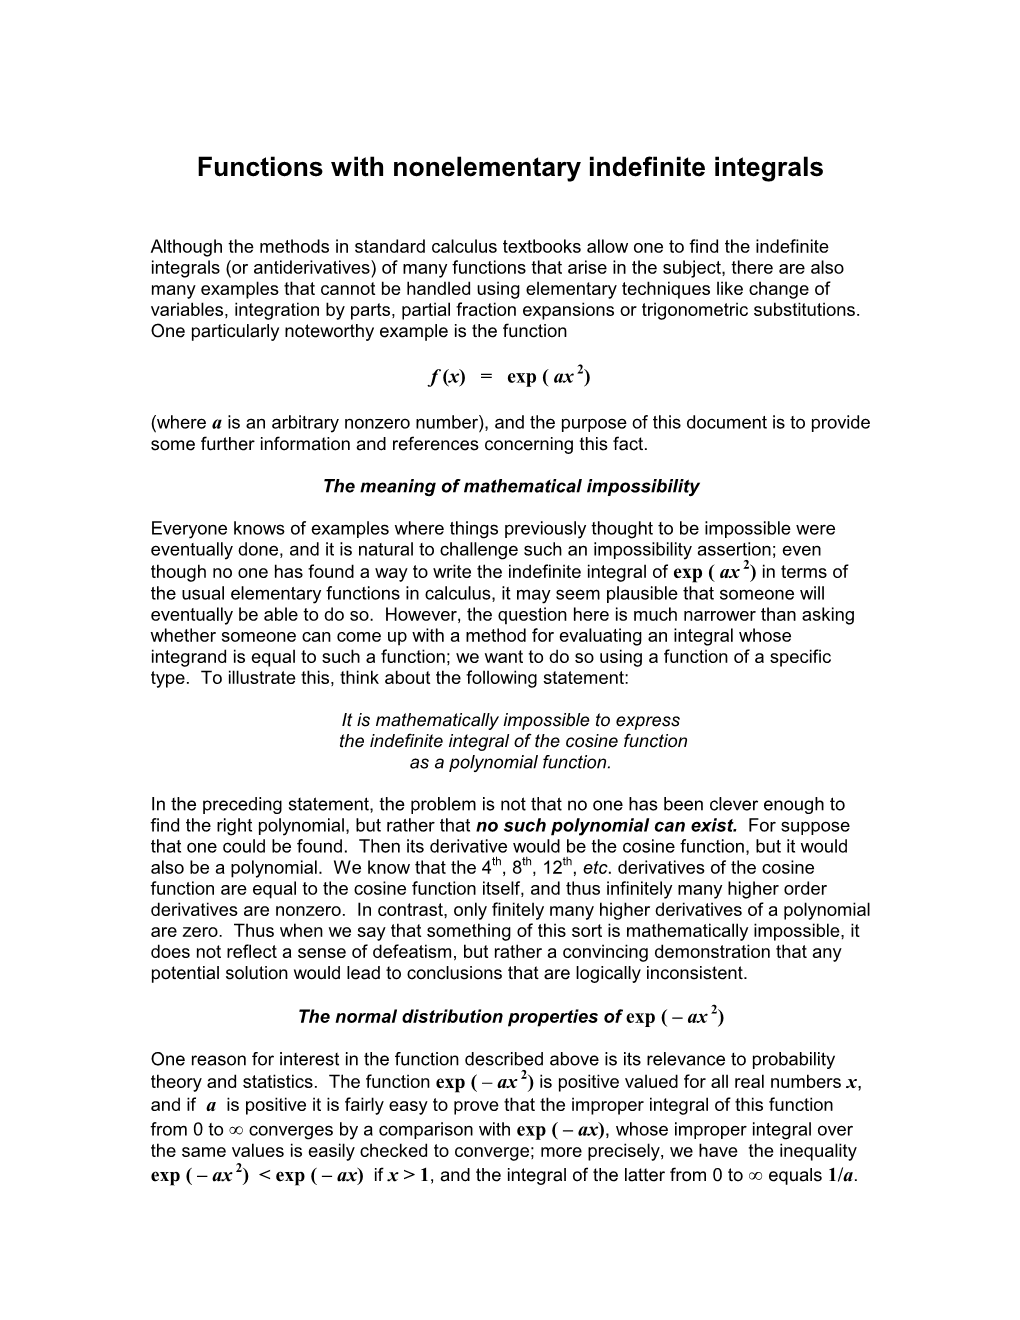 Functions with Nonelementary Indefinite Integrals